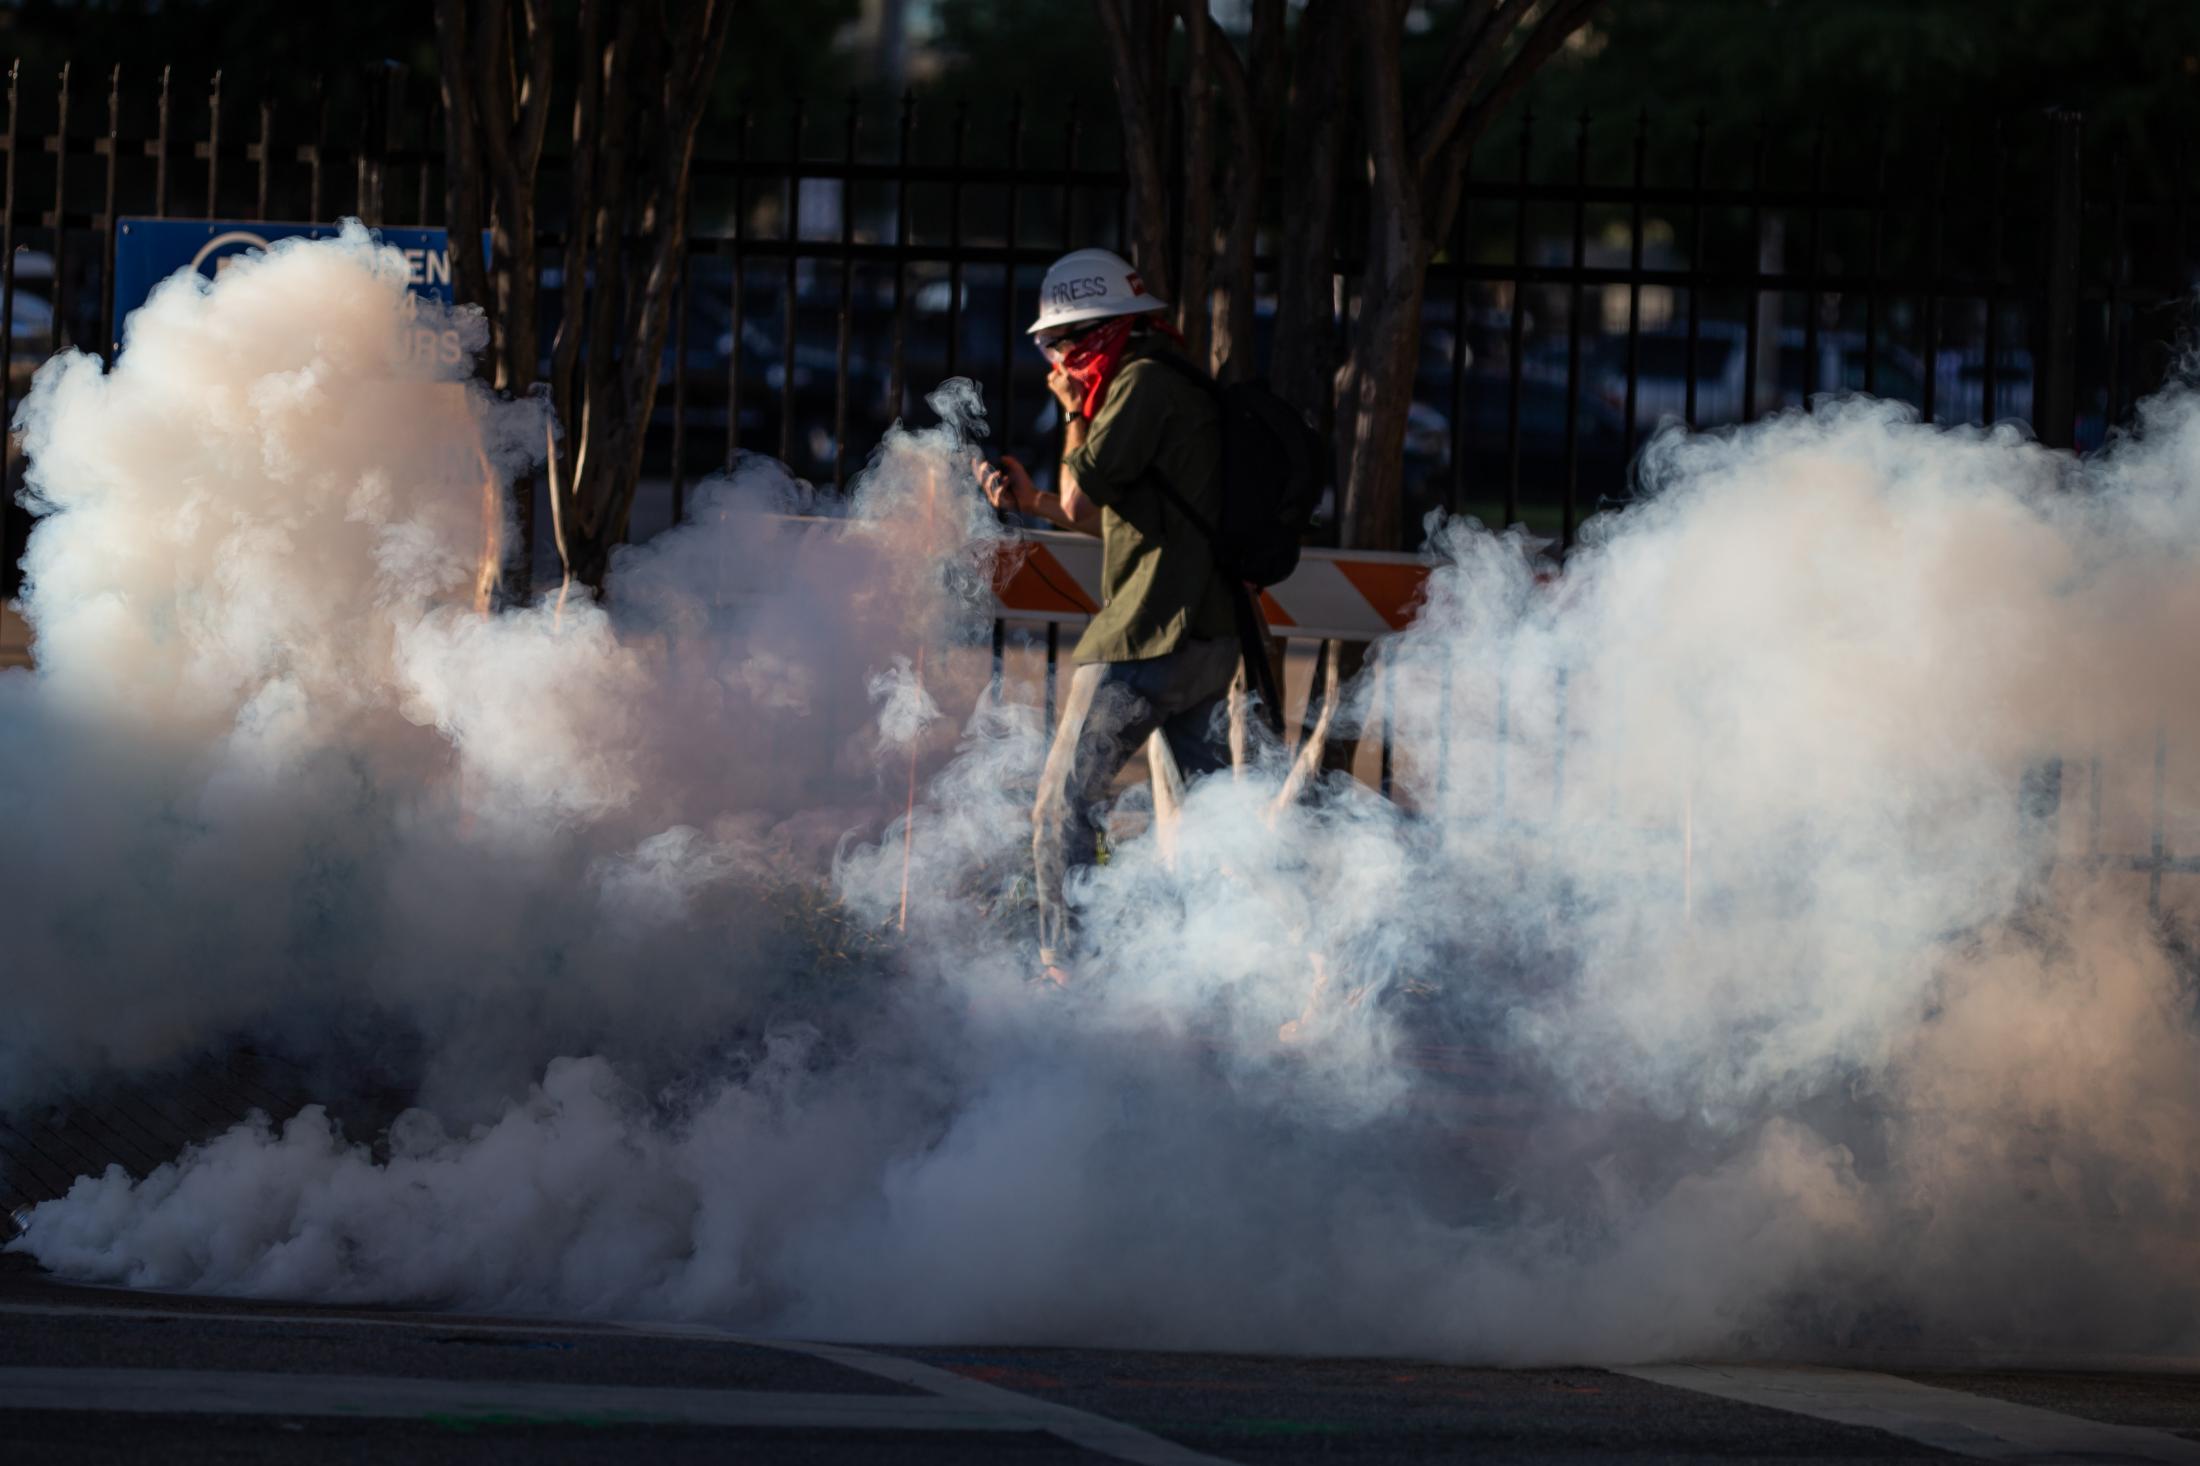 No Justice No Peace - A member of the press runs away from a cloud of tear gas...